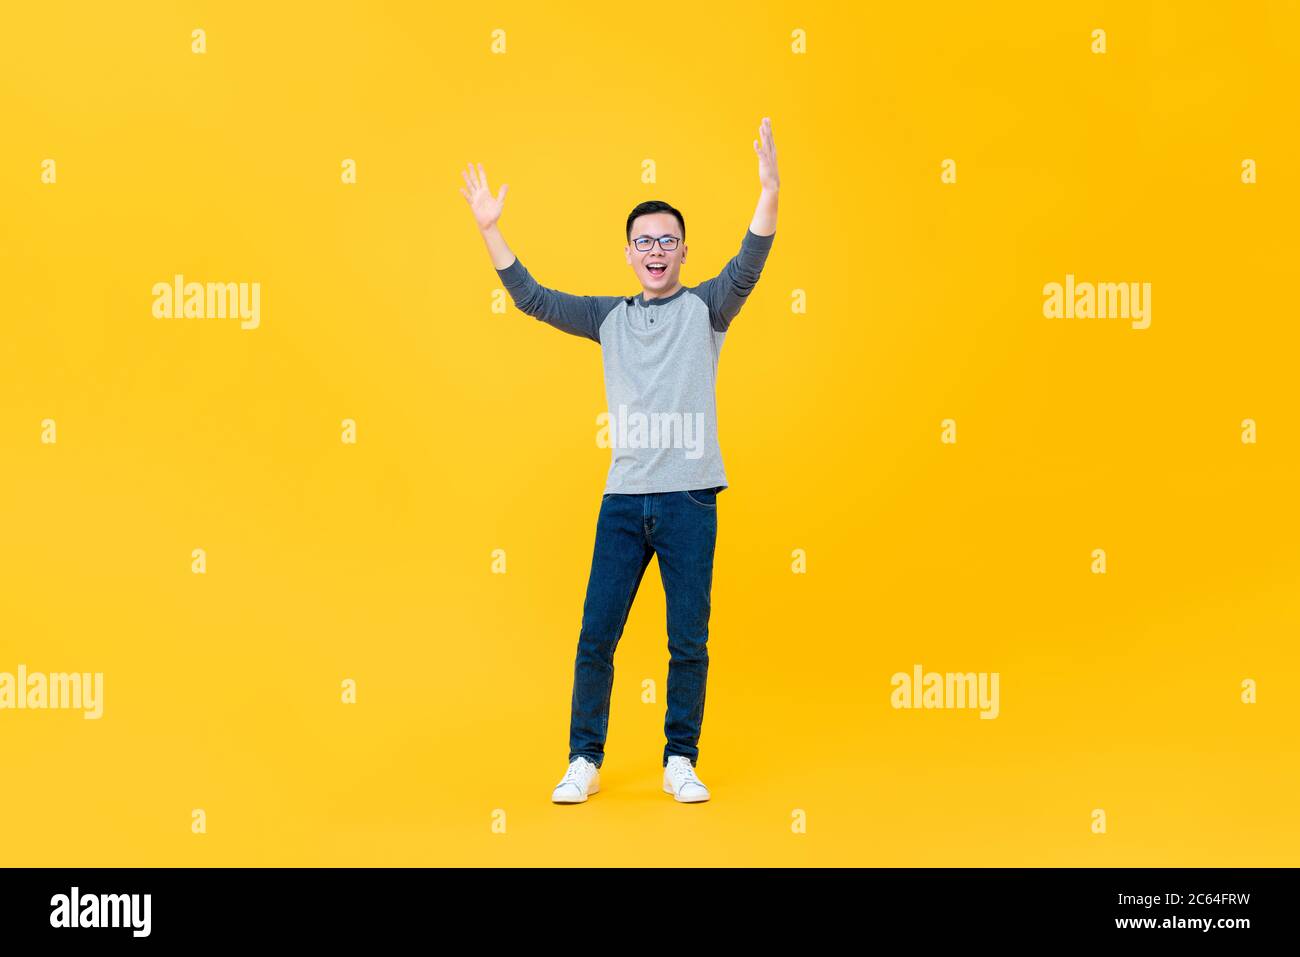 Full body portrait of cheerful young Asian man raising both arms in the air isolated on yellow background Stock Photo